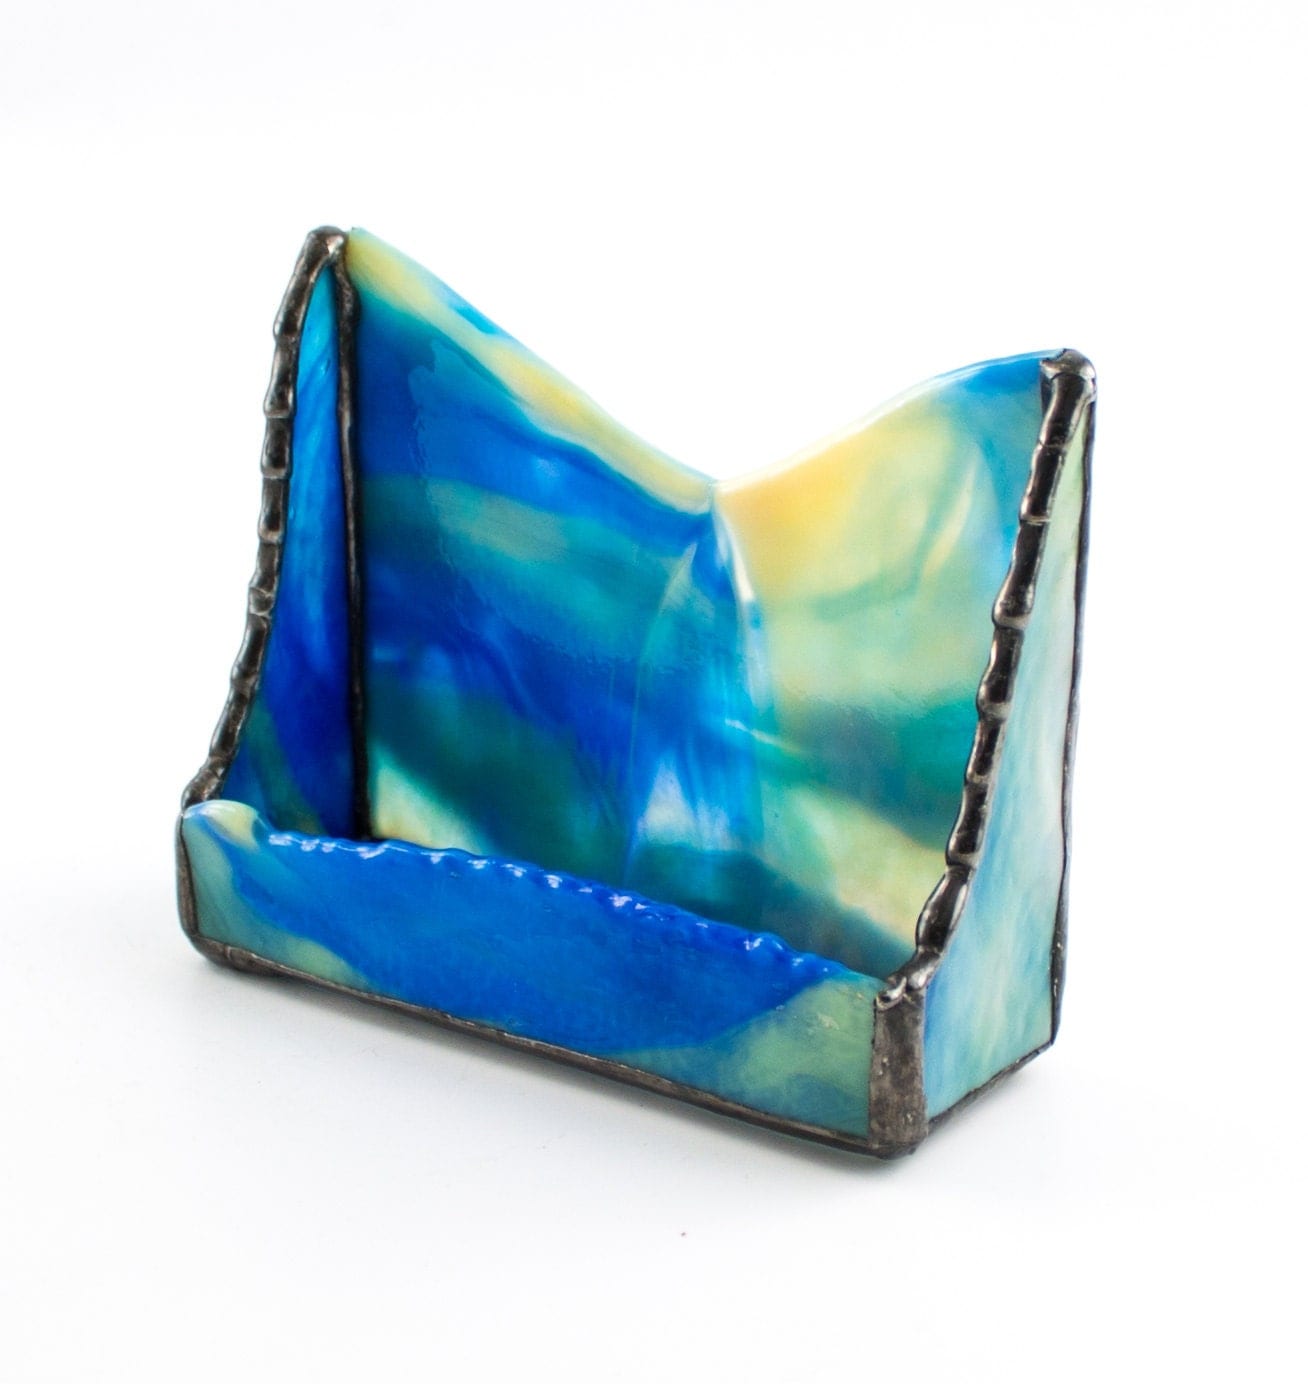 Unique Desktop Business Card Holder Blue and Yellow Stained